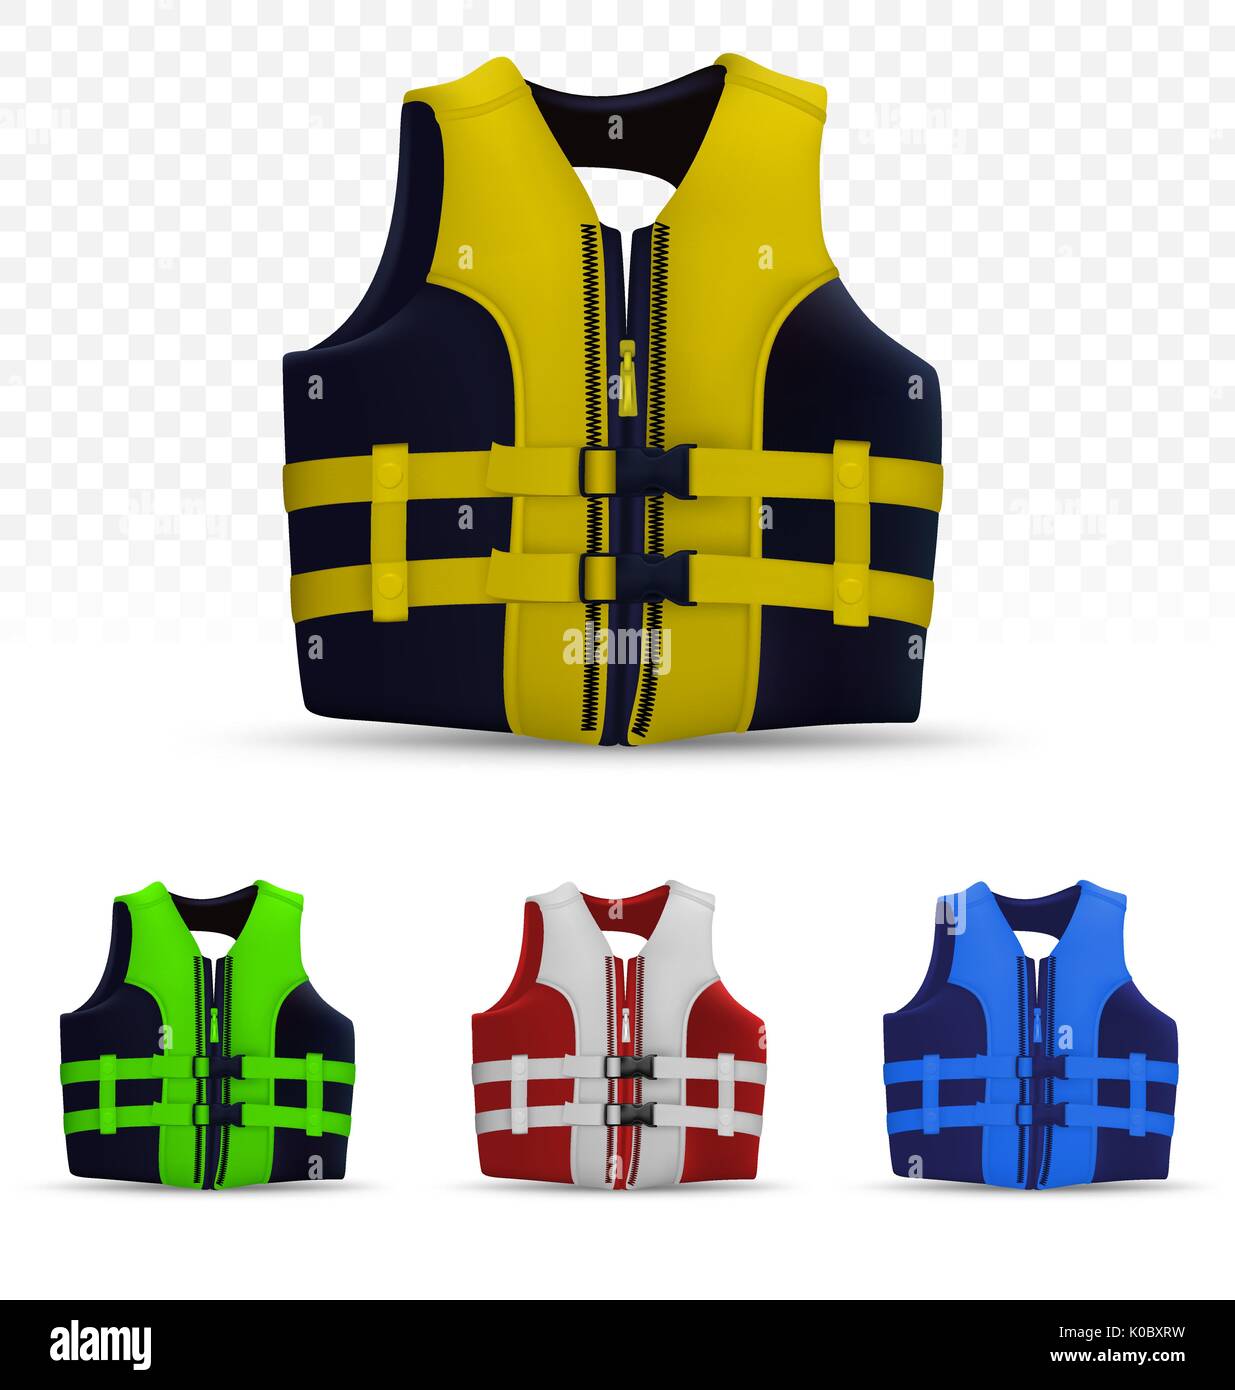 Unisex life vest isolated on transparent background Stock Vector